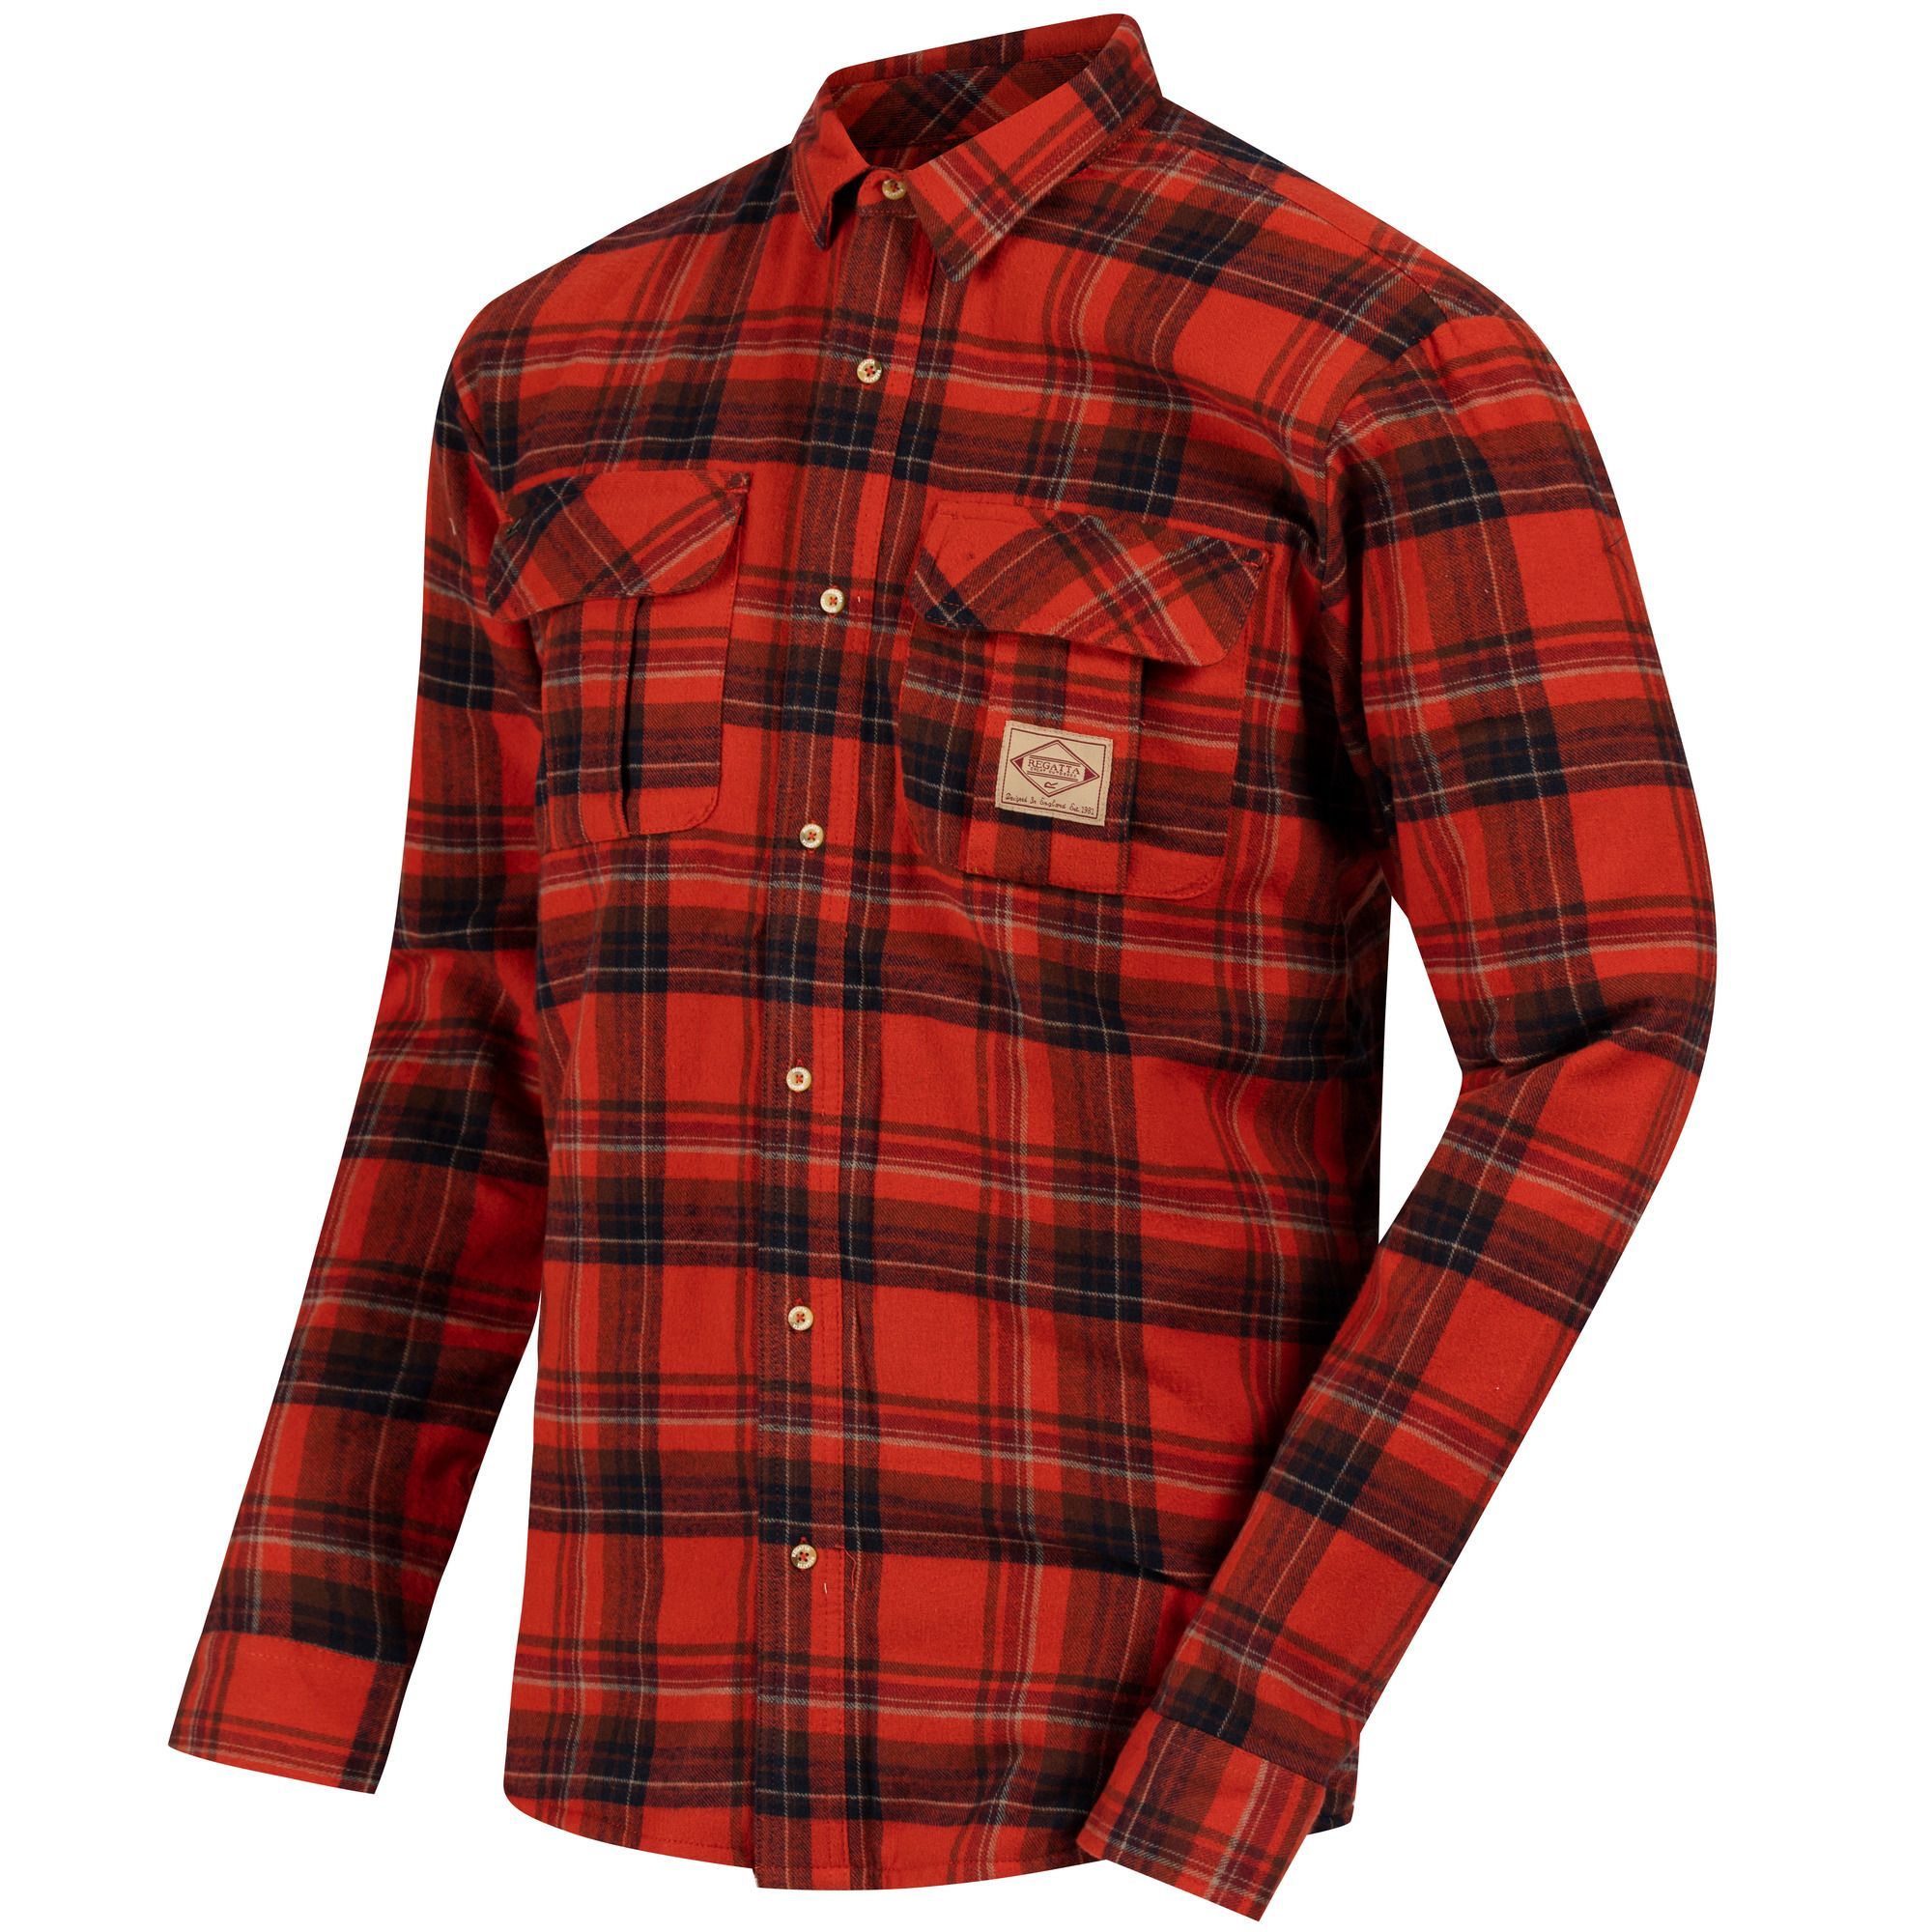 Warm, long-sleeved, checked shirt. Naturally breathable Coolweave Cotton and warming fleece around the body. Classic lumberjack styling. 1981 heritage badge on the chest. Regatta Mens sizing (chest approx): XS (35-36in/89-91.5cm), S (37-38in/94-96.5cm), M (39-40in/99-101.5cm), L (41-42in/104-106.5cm), XL (43-44in/109-112cm), XXL (46-48in/117-122cm), XXXL (49-51in/124.5-129.5cm), XXXXL (52-54in/132-137cm), XXXXXL (55-57in/140-145cm).